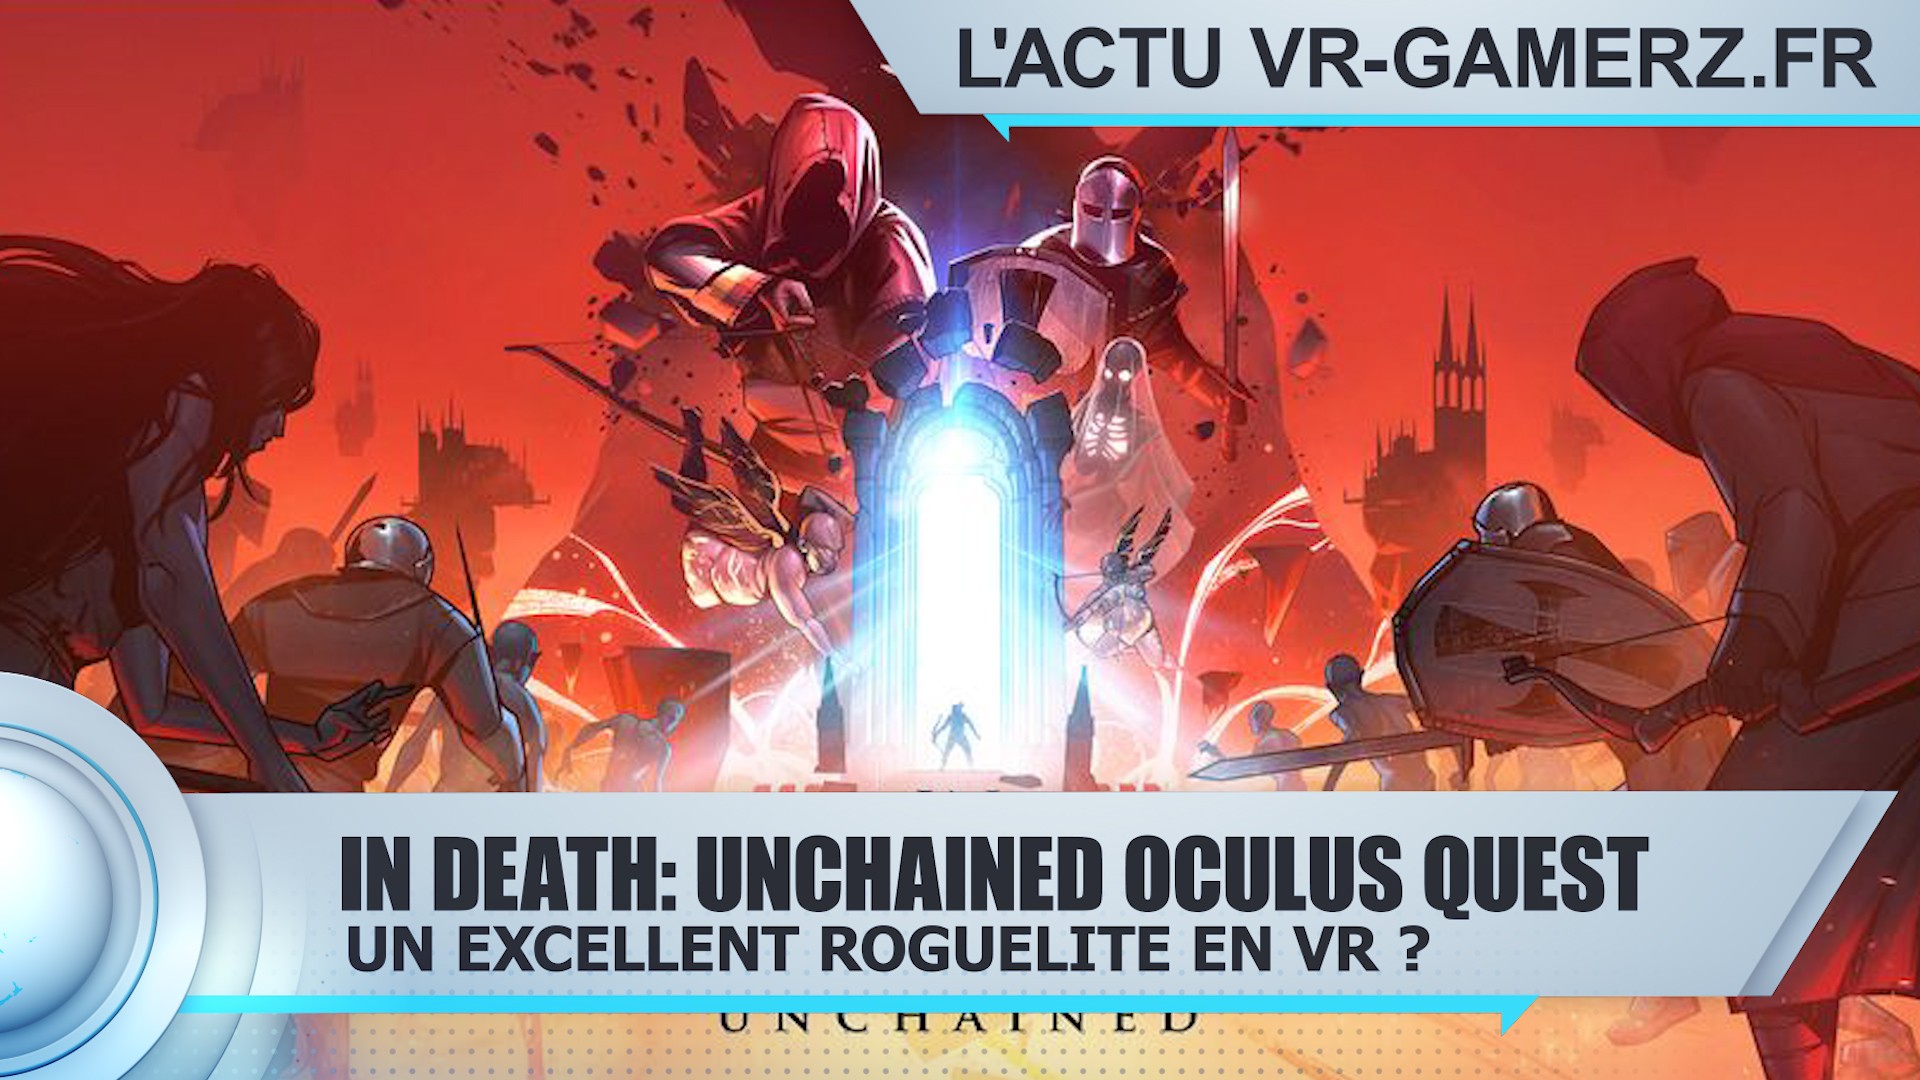 In Death: Unchained Oculus quest